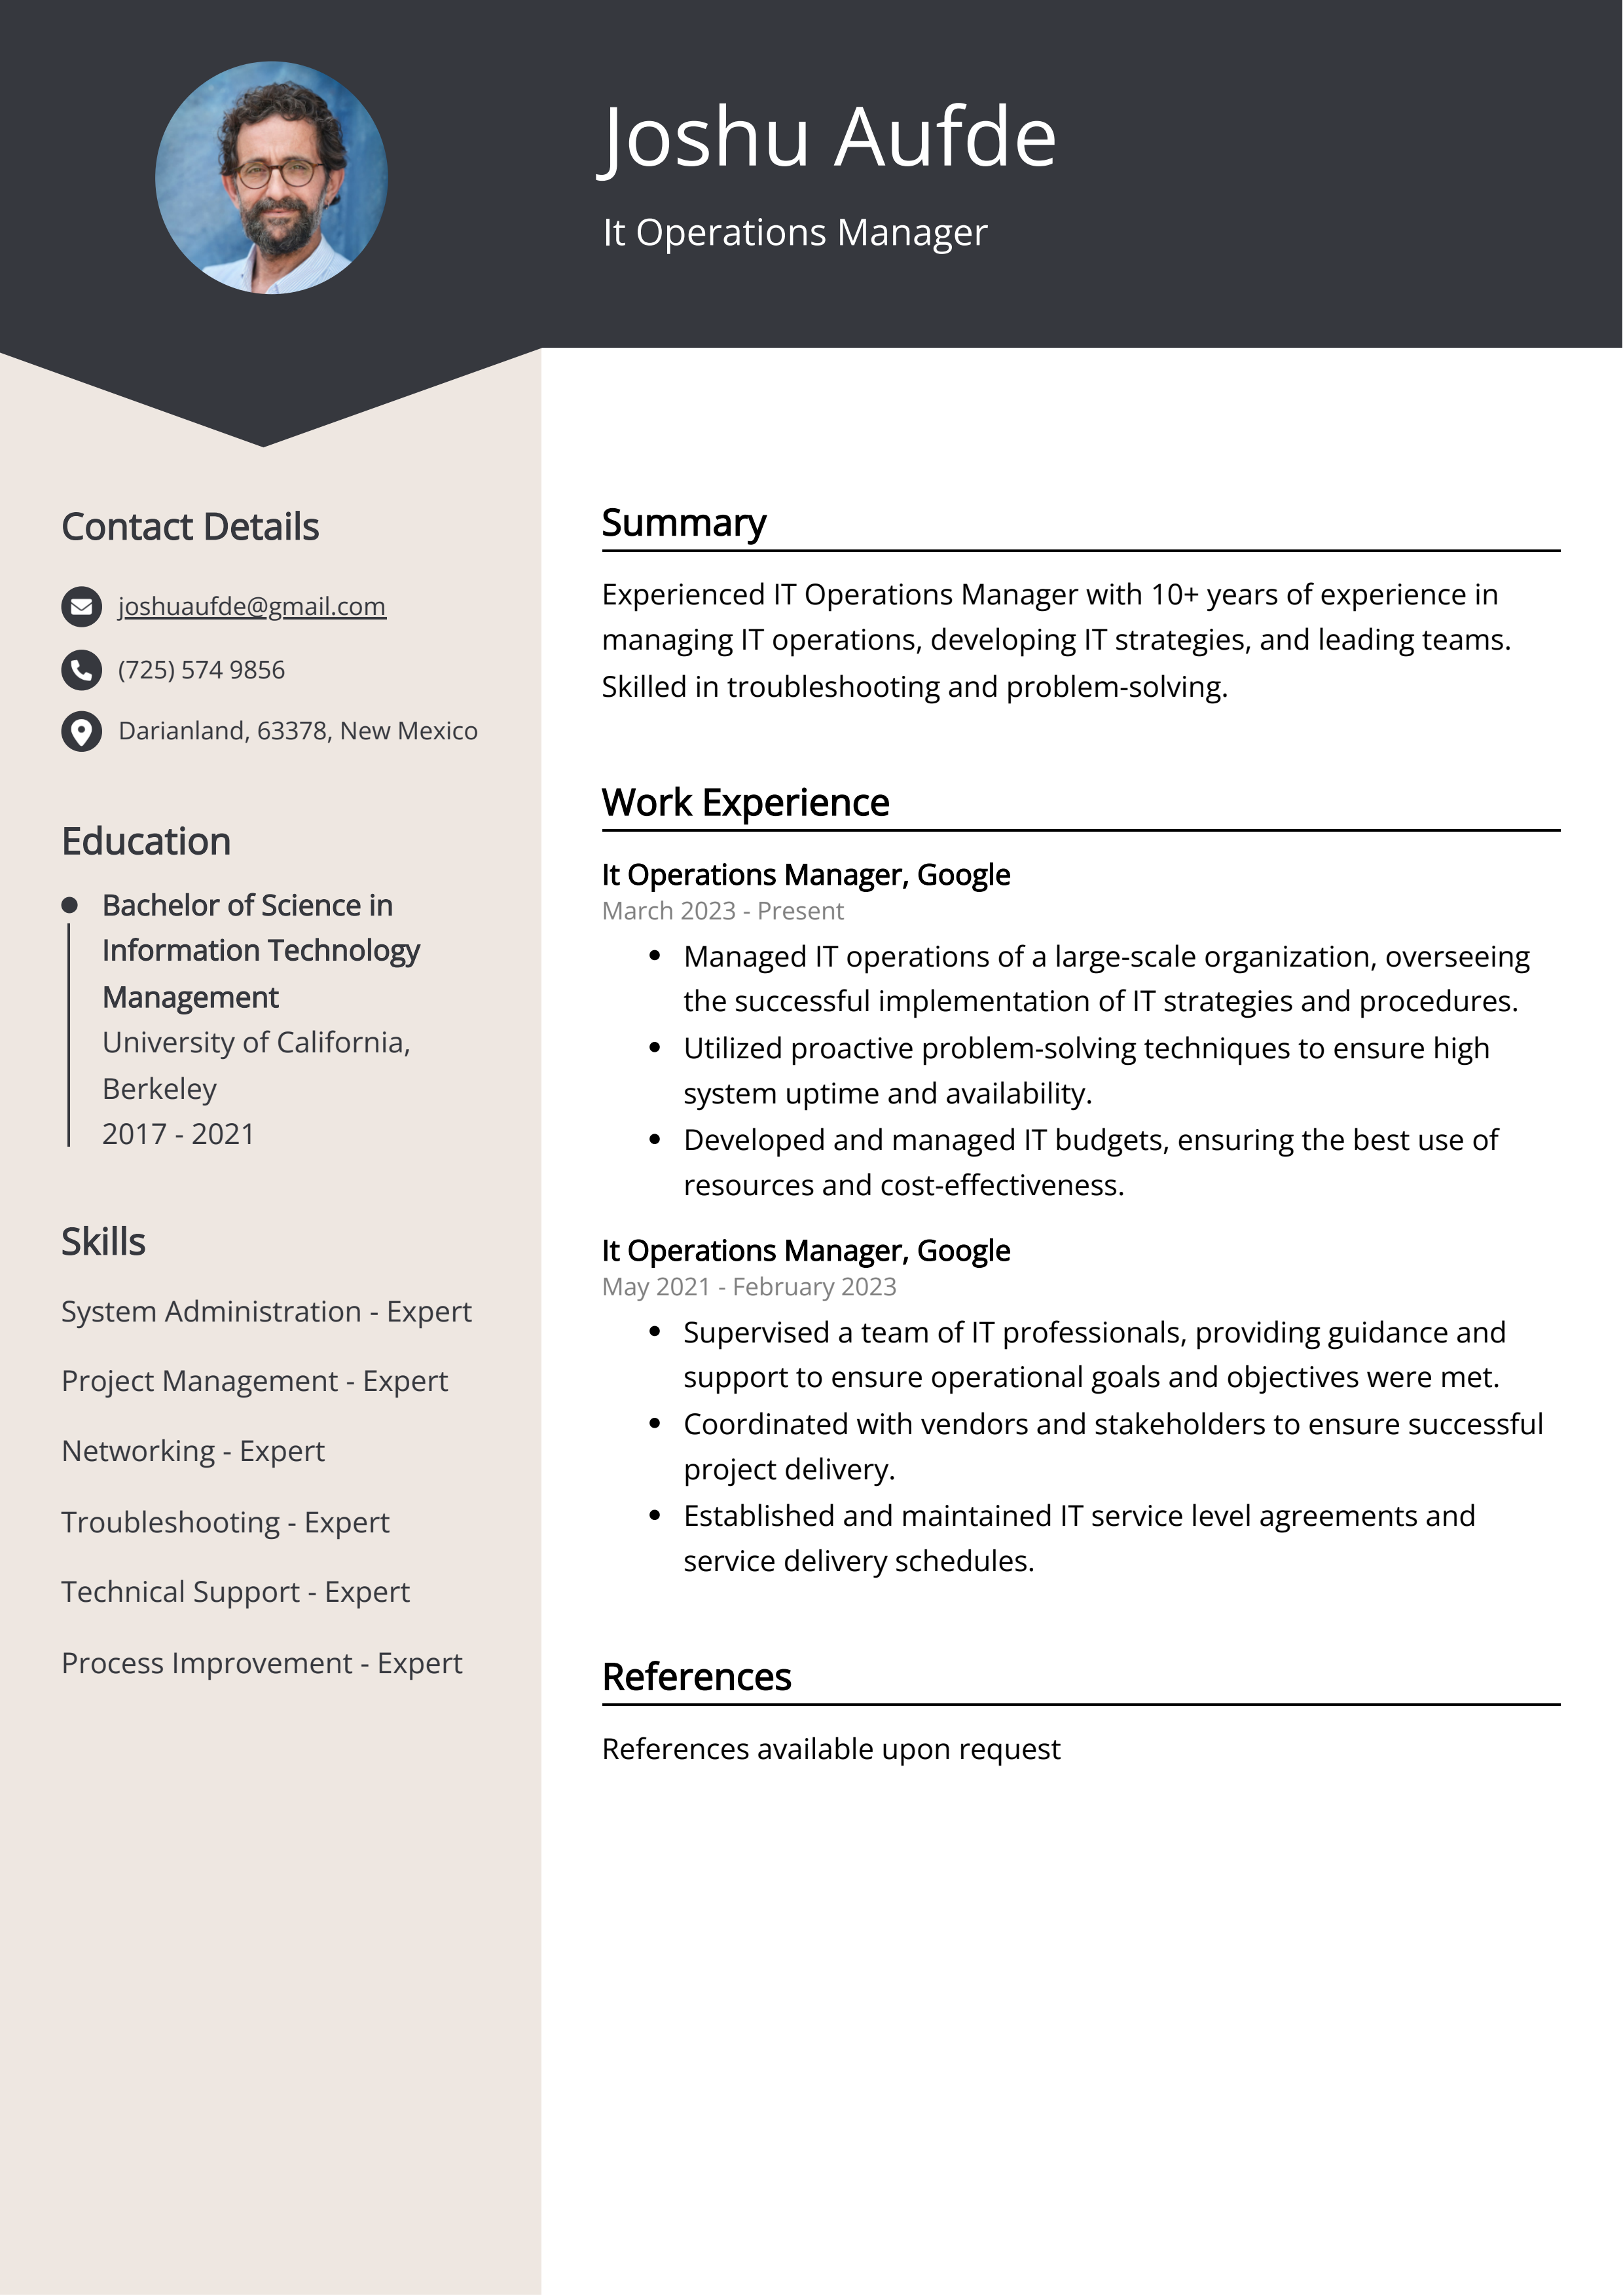 It Operations Manager CV Example